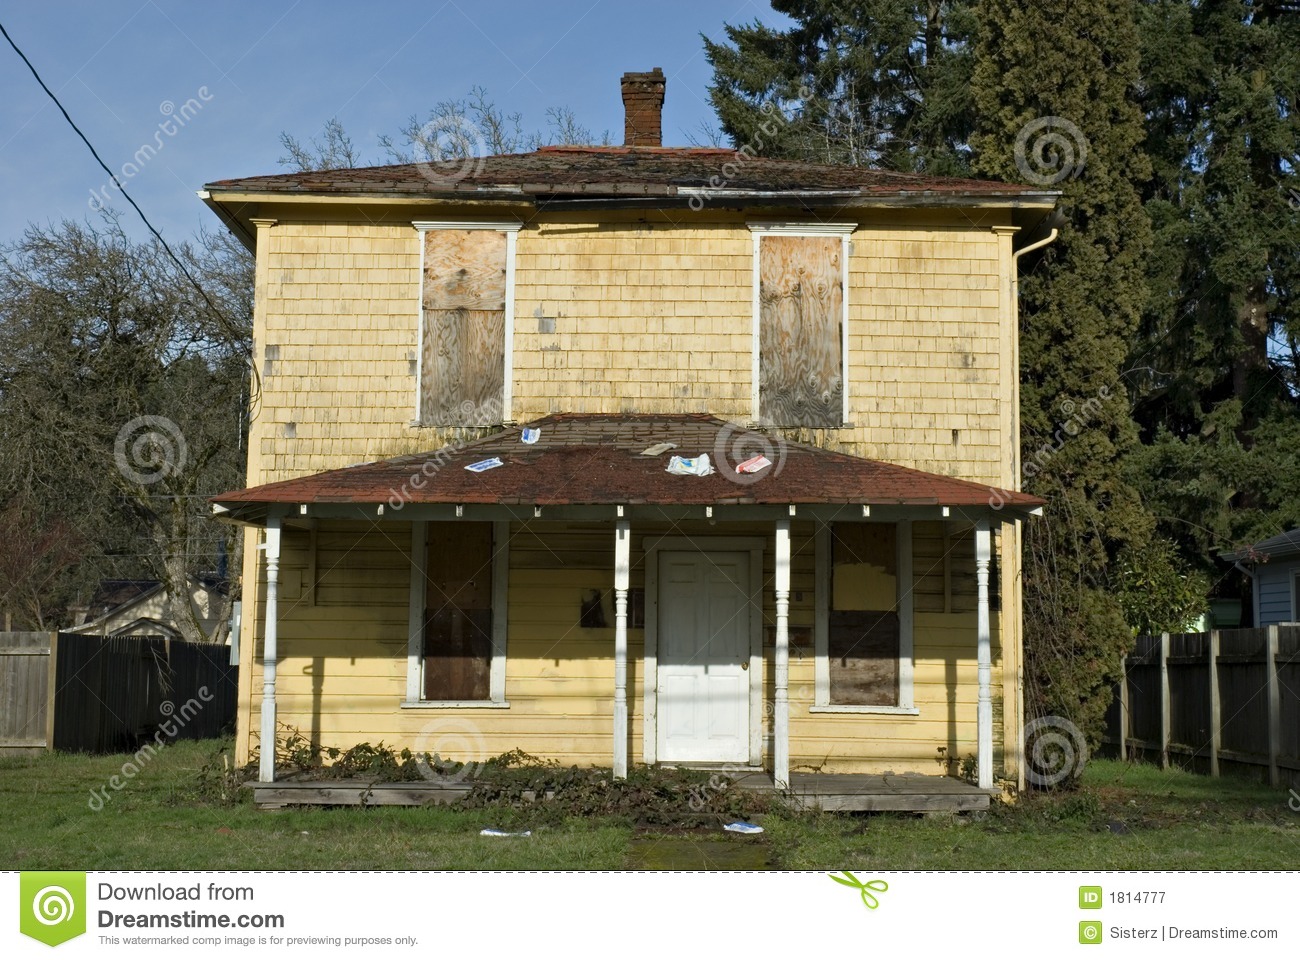 Old Yellow House Royalty Free Stock Photography   Image  1814777